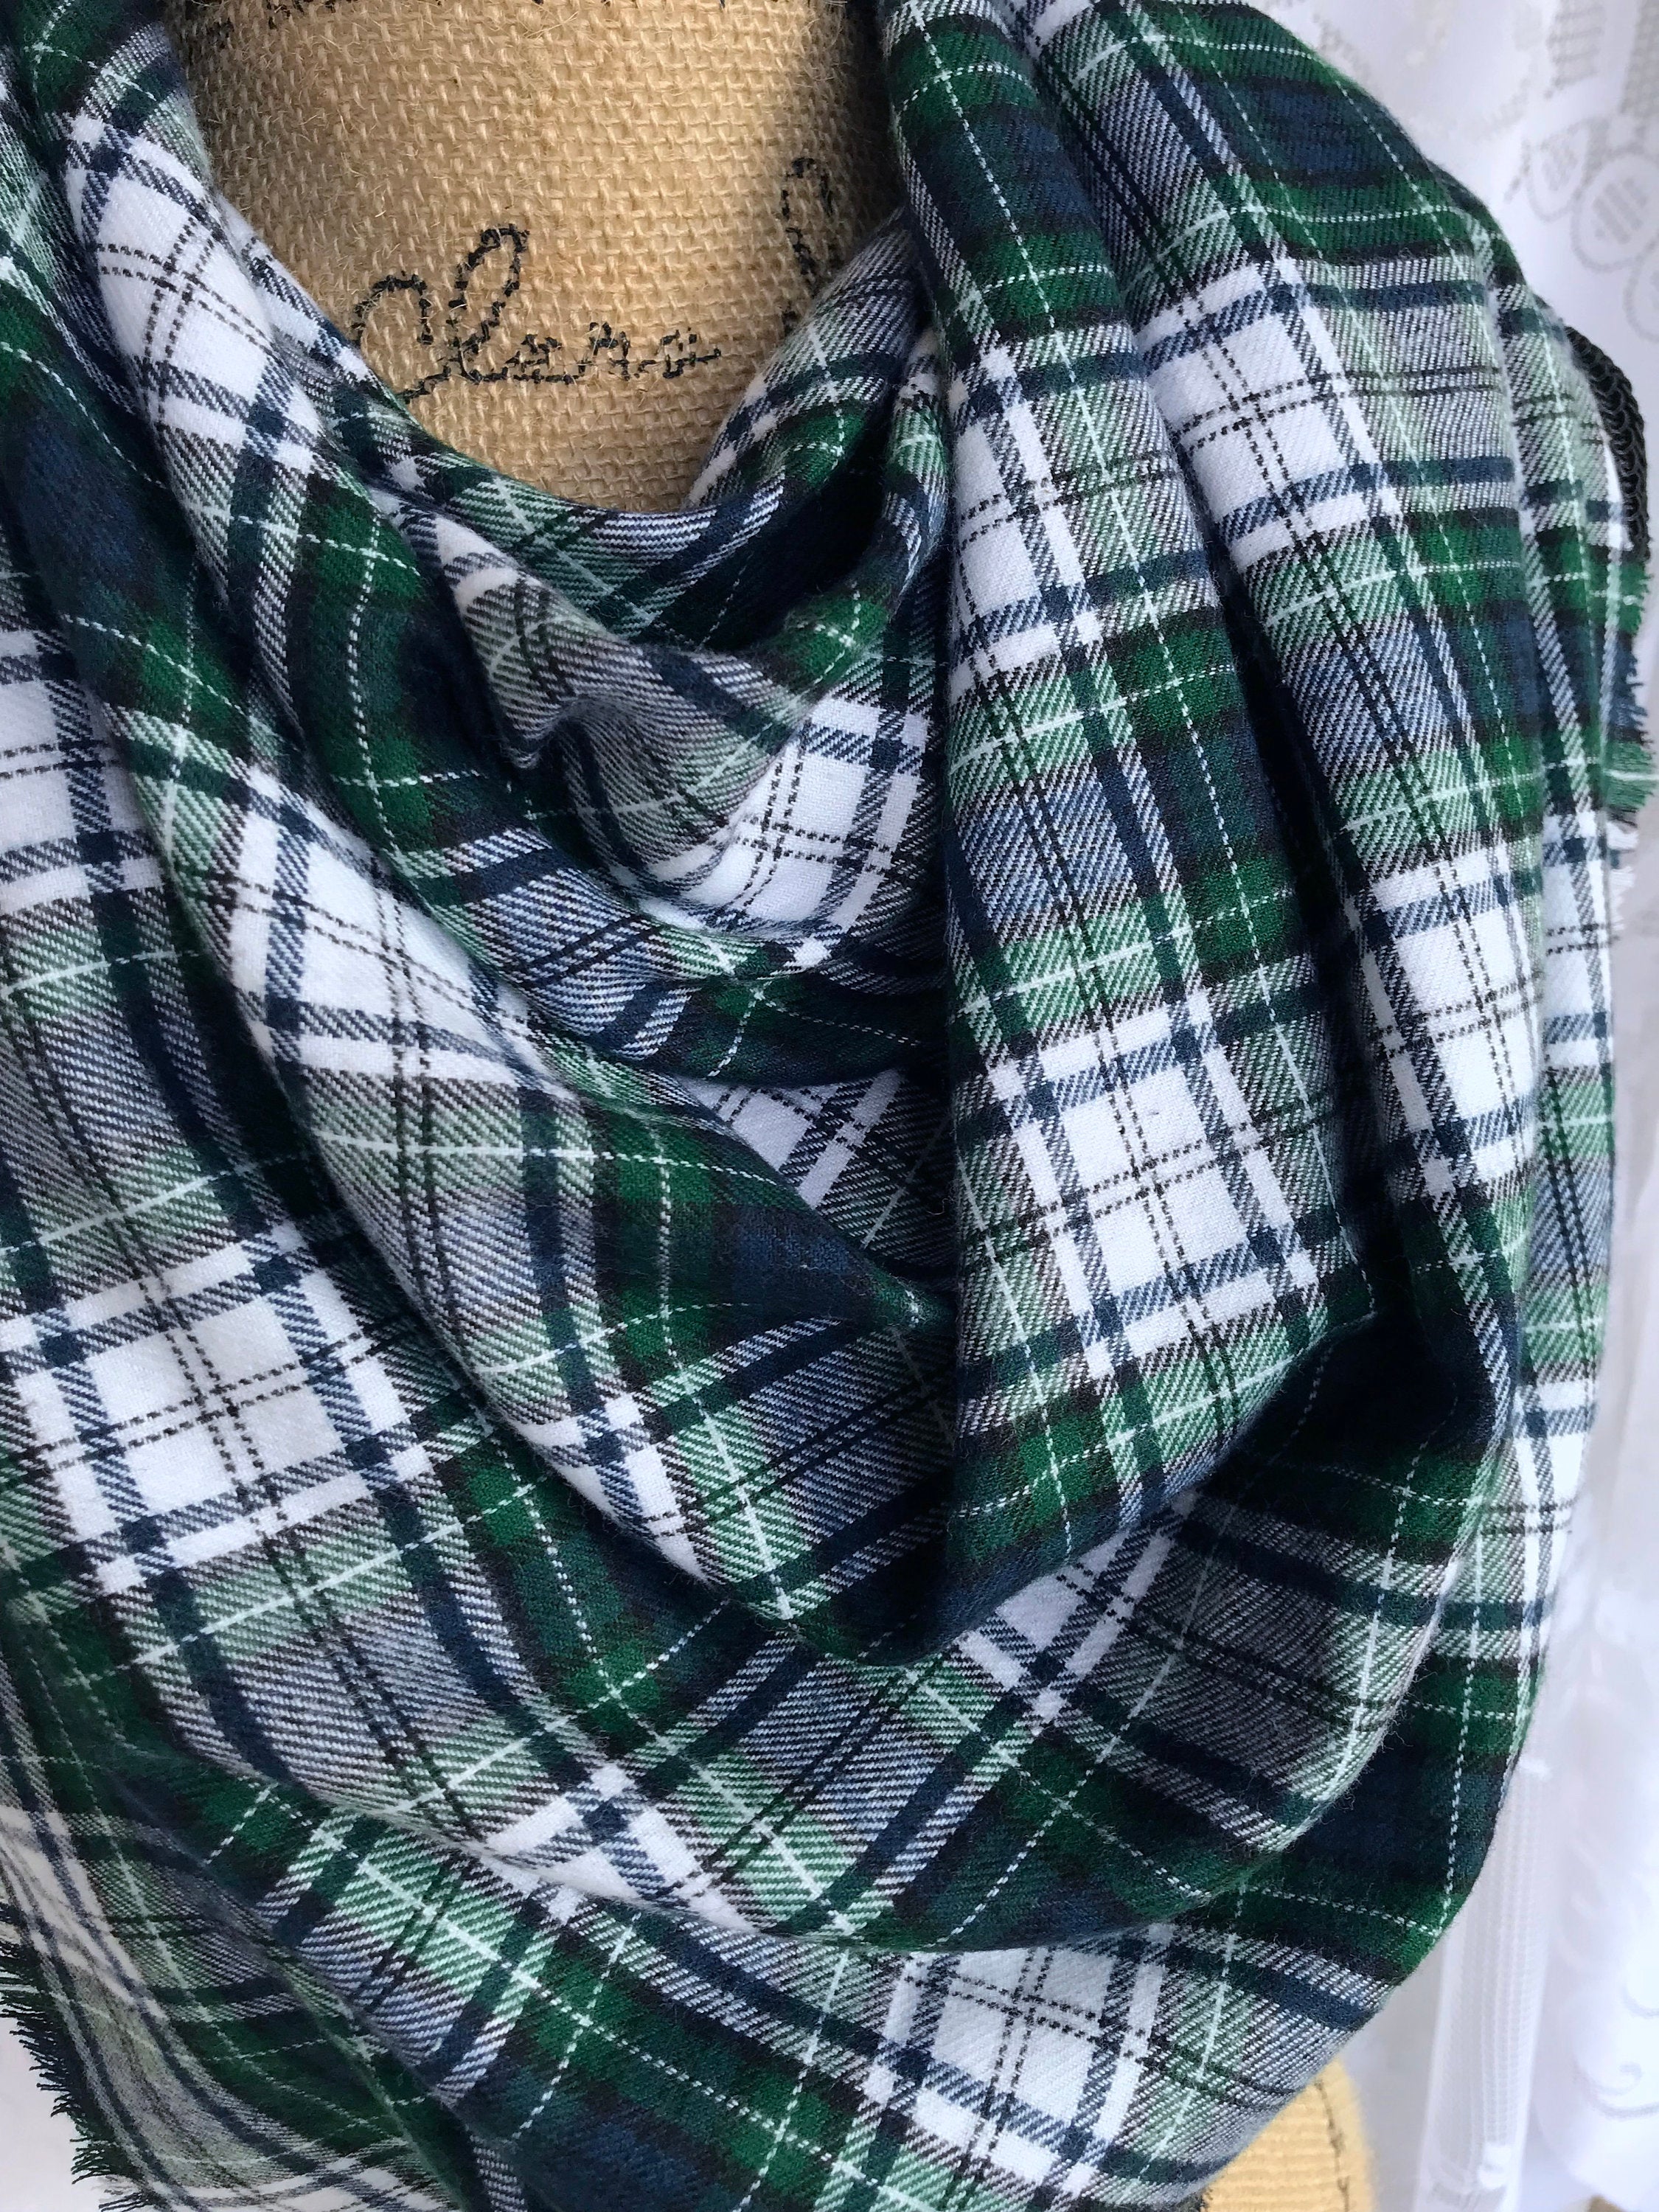 Tartan in Forest Green, Navy Blue, and White Flannel Plaid Infinity or Blanket Scarf Classic Tartan Wrap Shawl Cowl